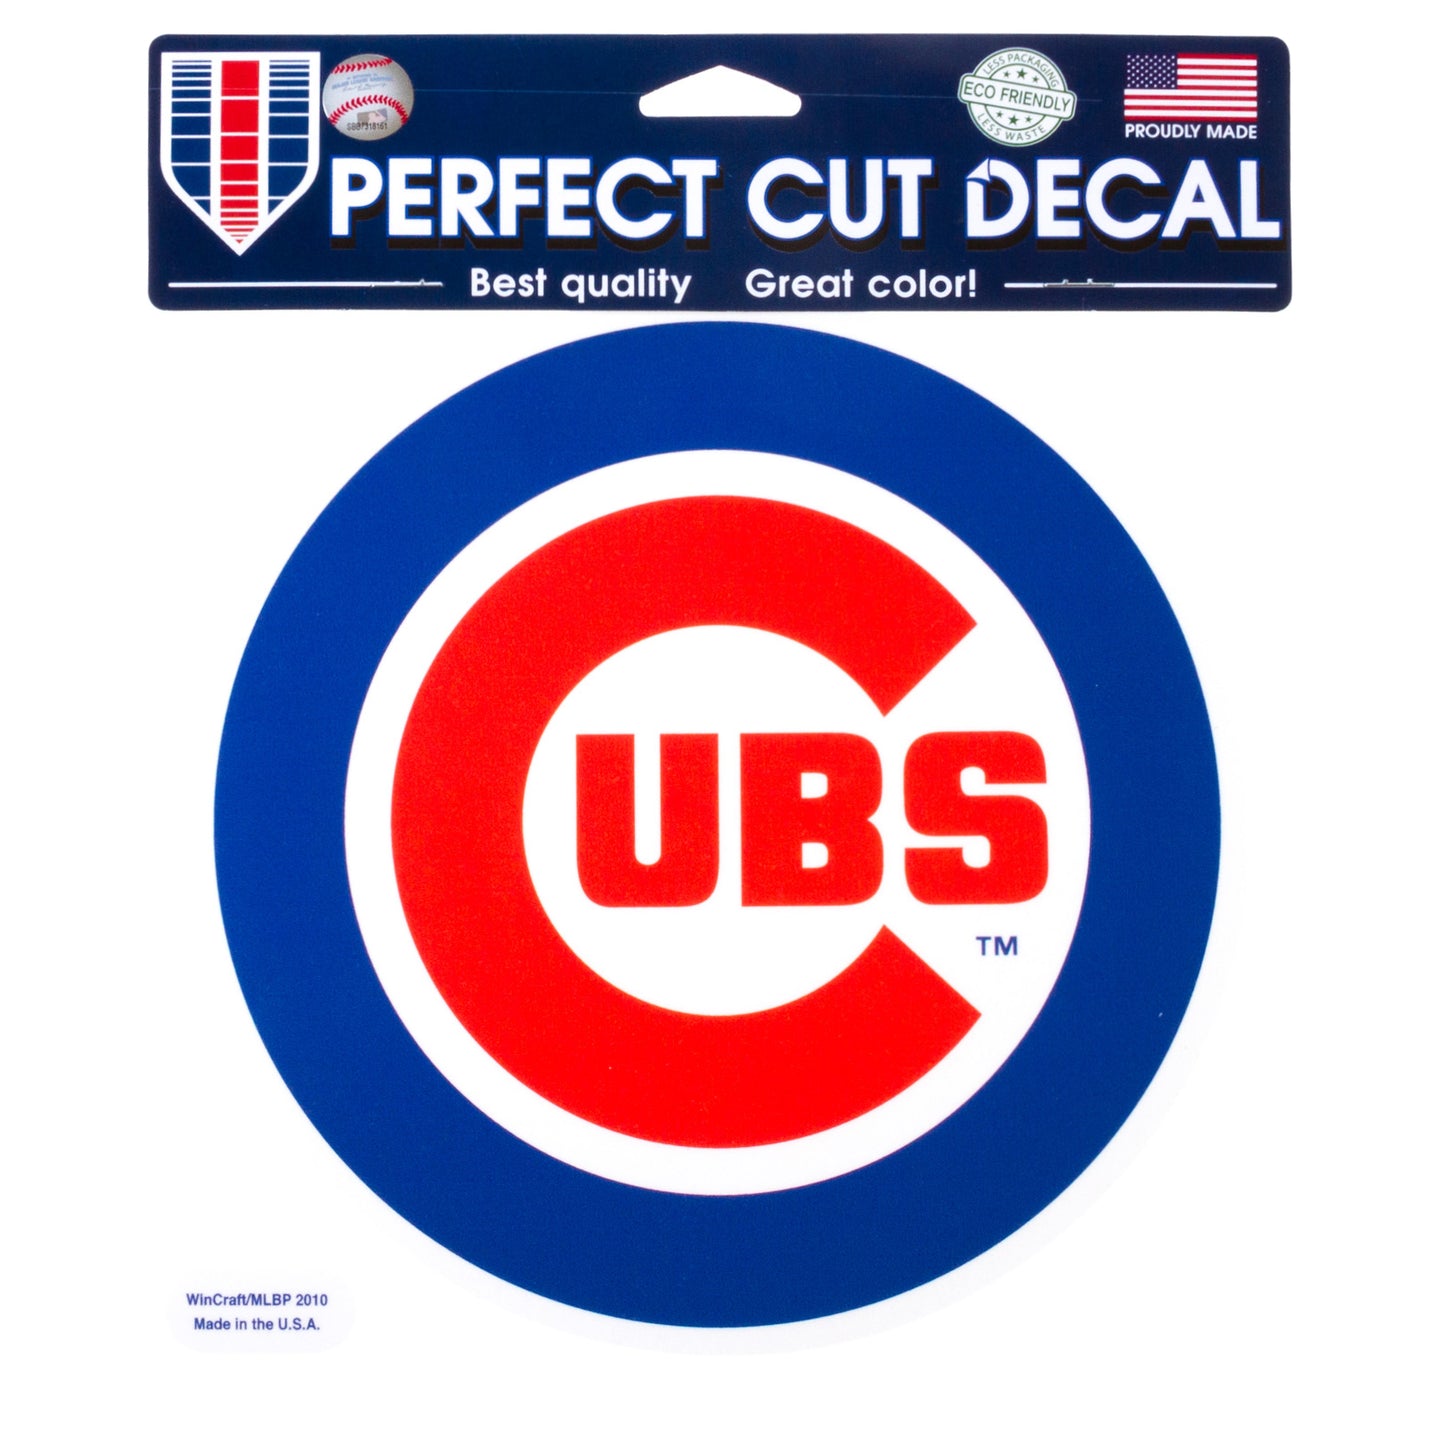 Chicago Cubs 8" x 8" Perfect Cut Decal